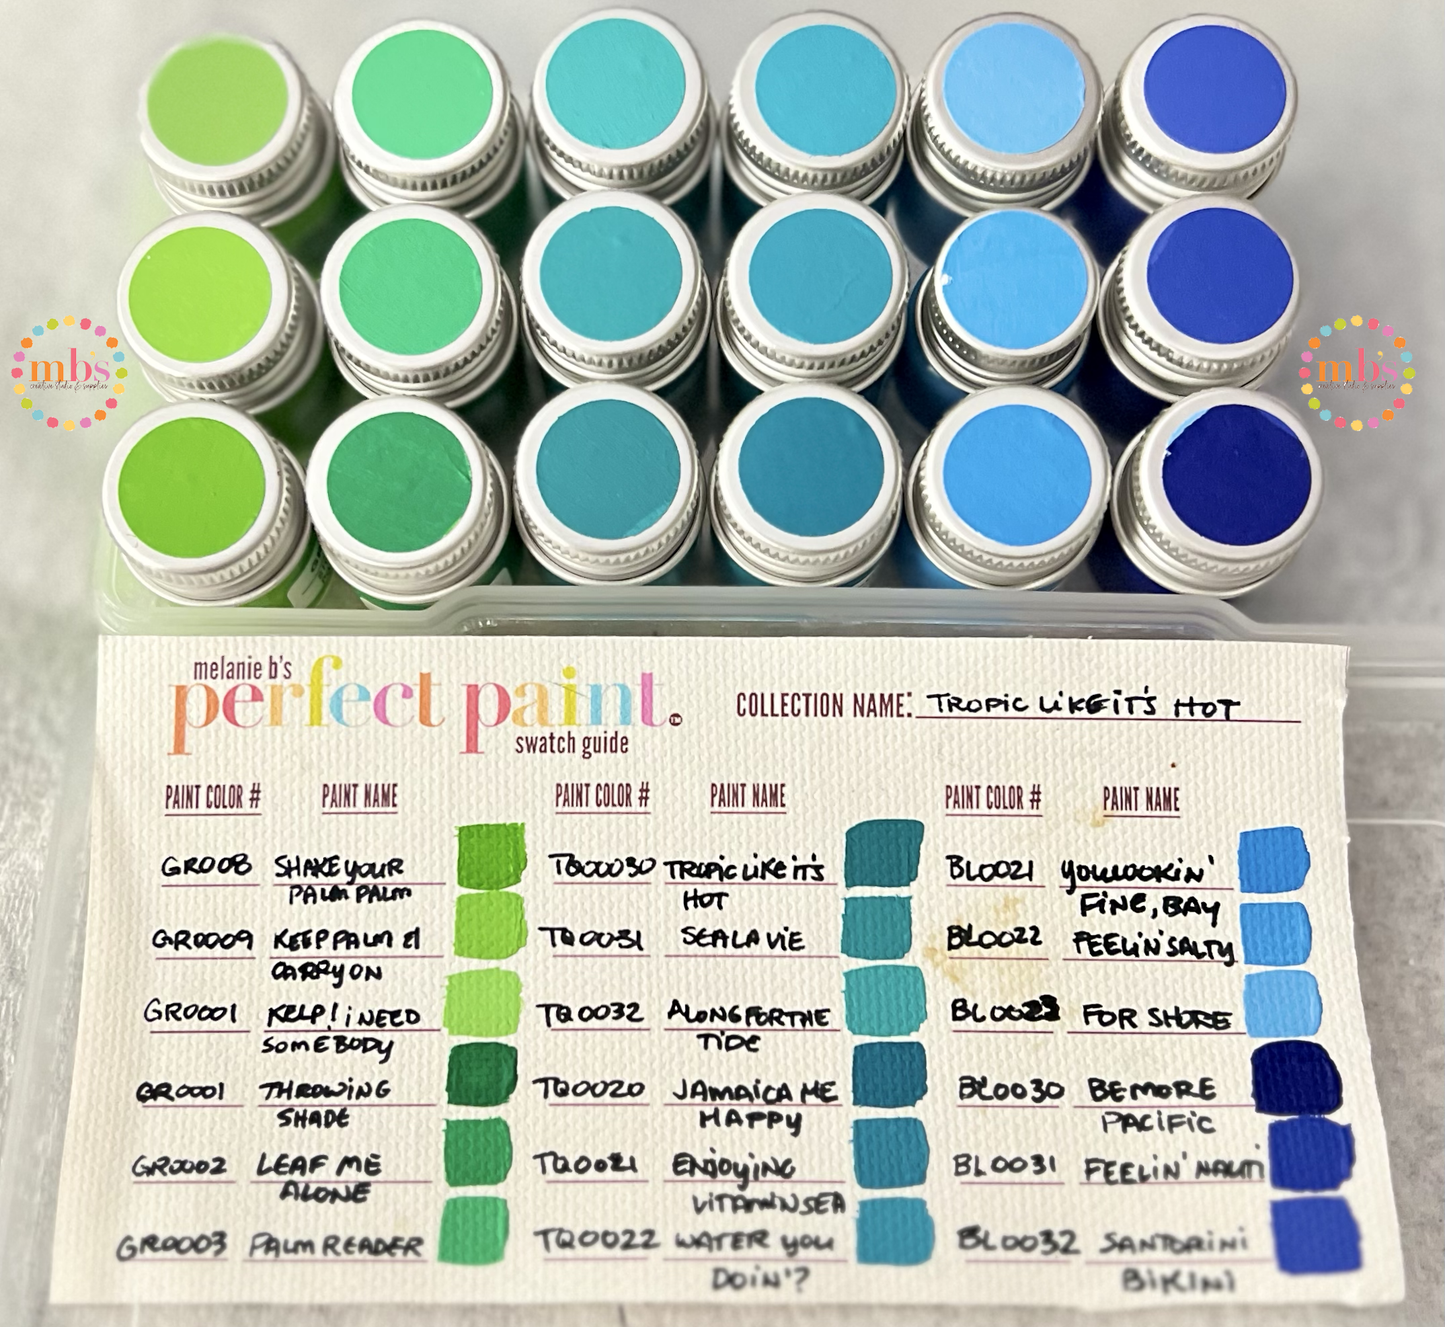 PREORDER ITEM - Melanie B's Handmade Acrylic "Perfect Paint" - TROPIC LIKE IT'S HOT Collection